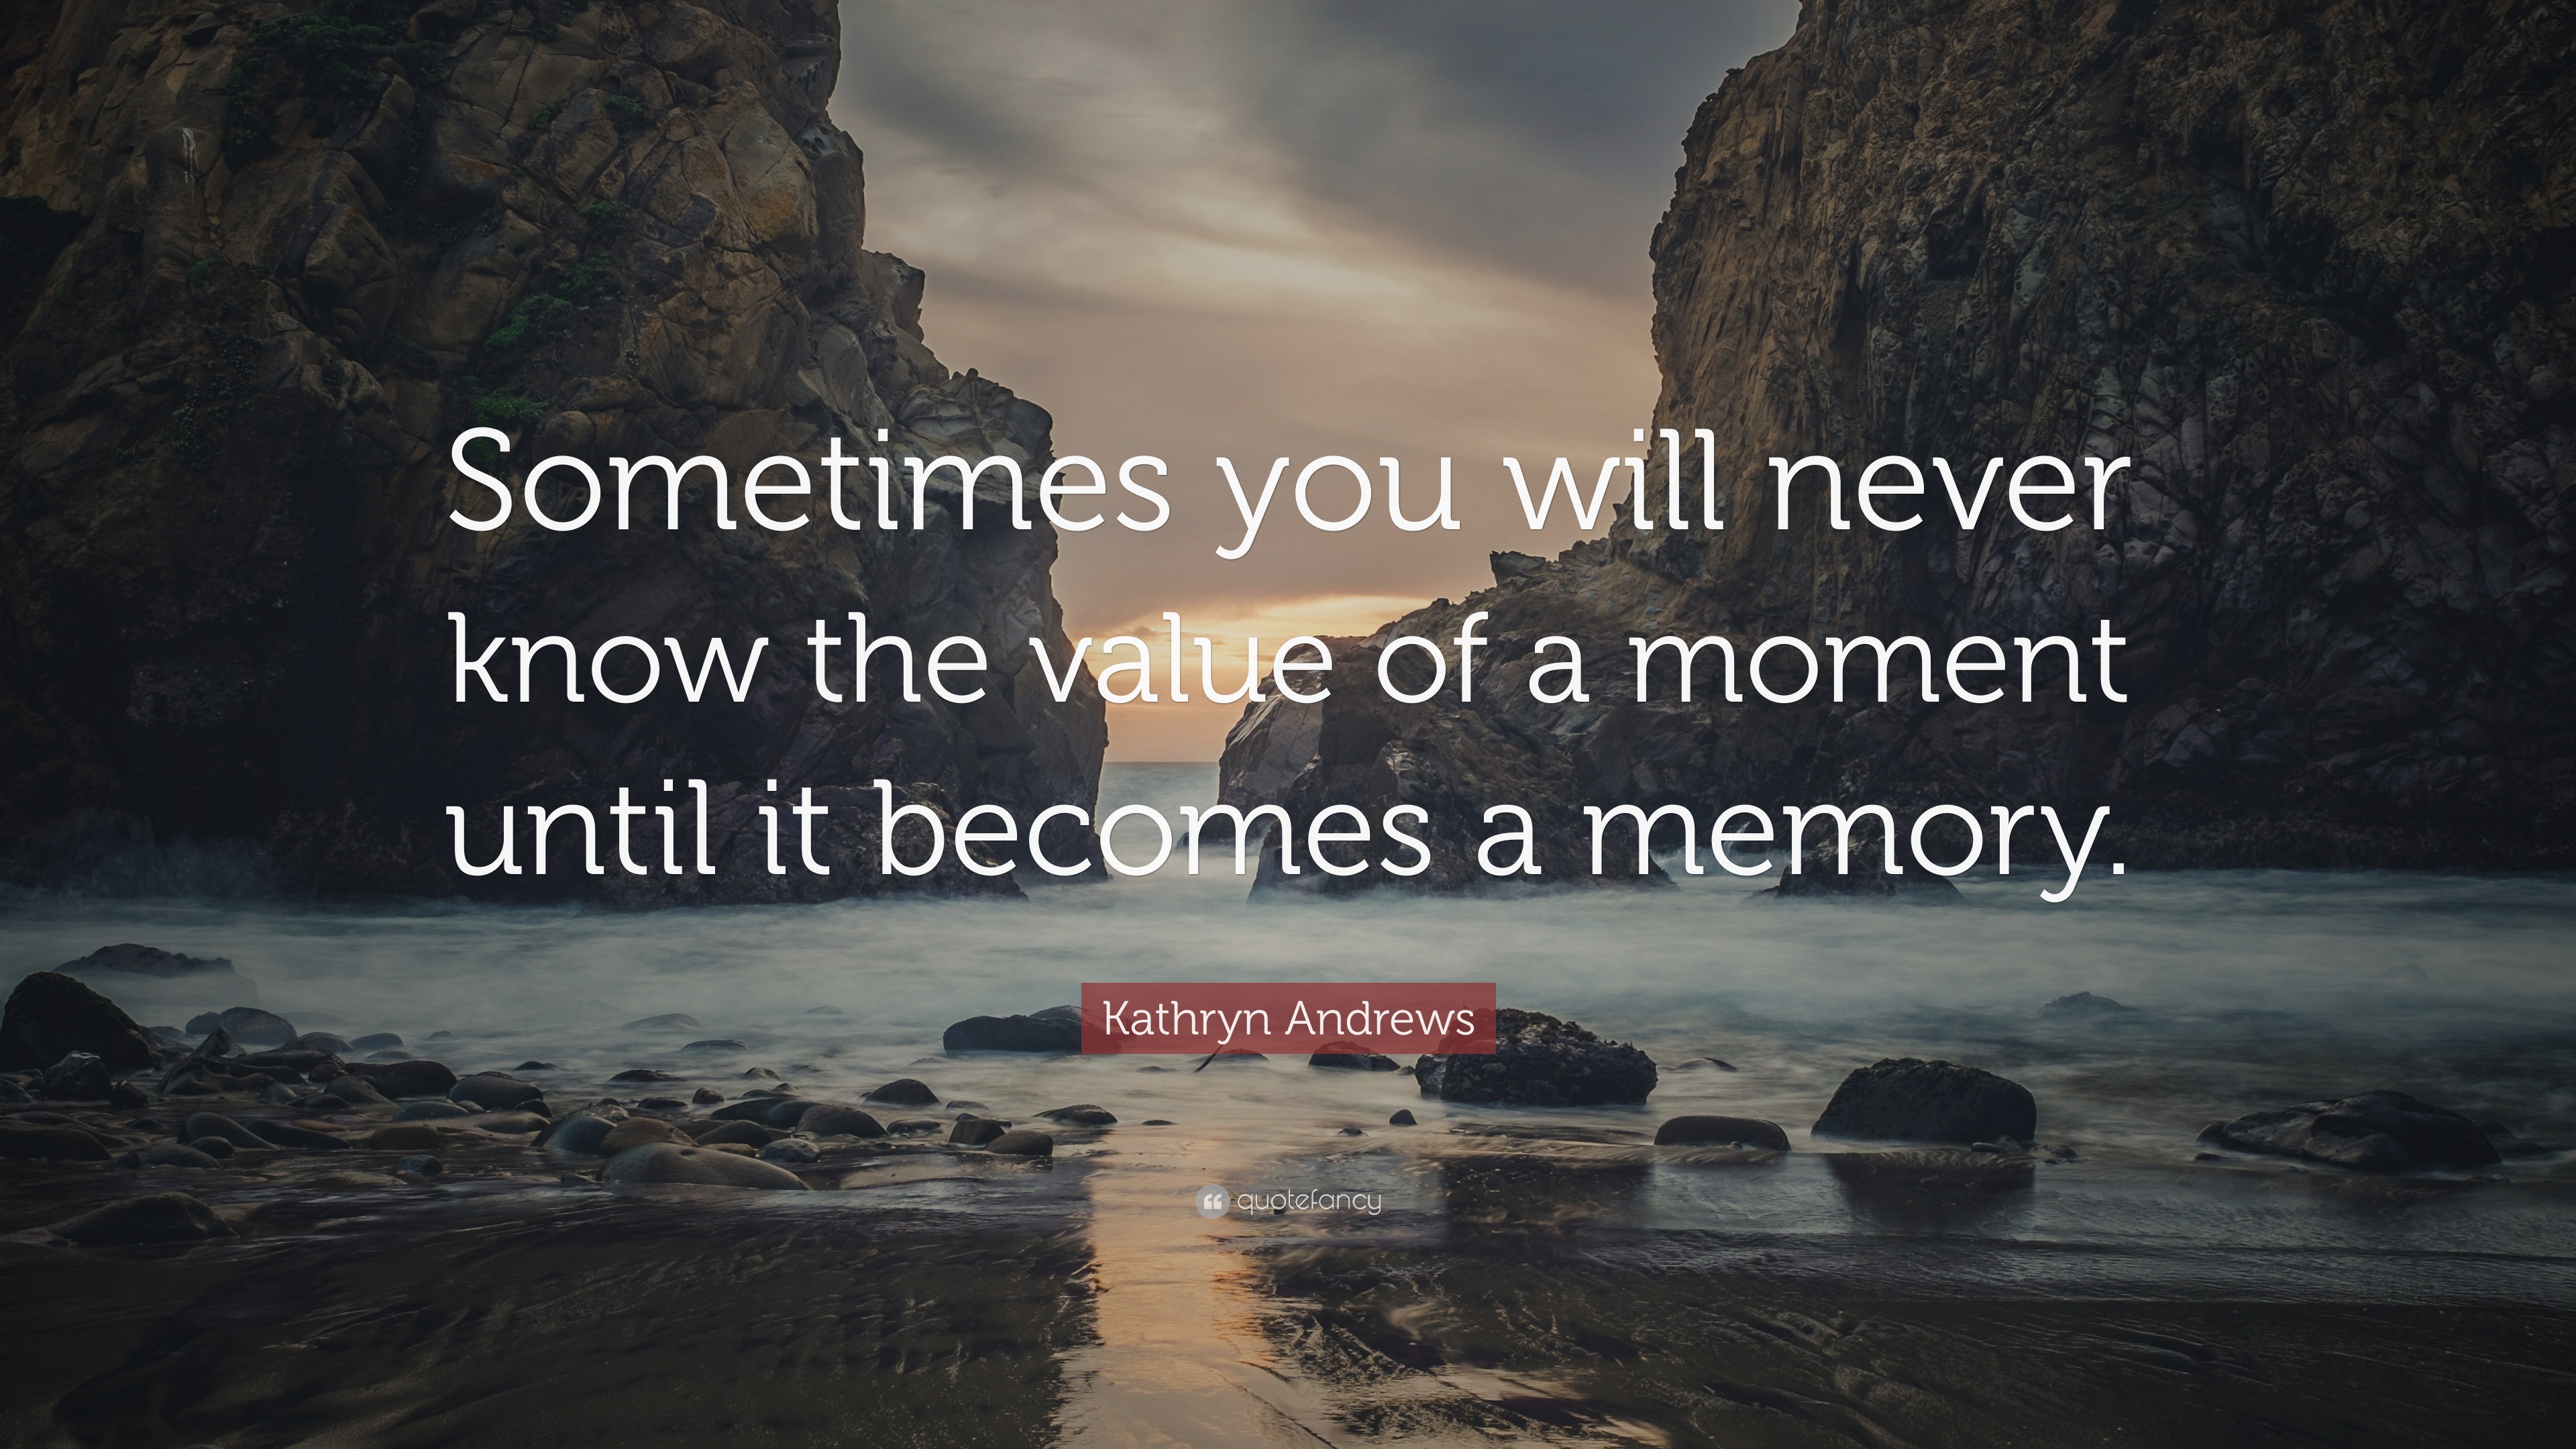 Kathryn Andrews Quote: “Sometimes you will never know the value of a ...